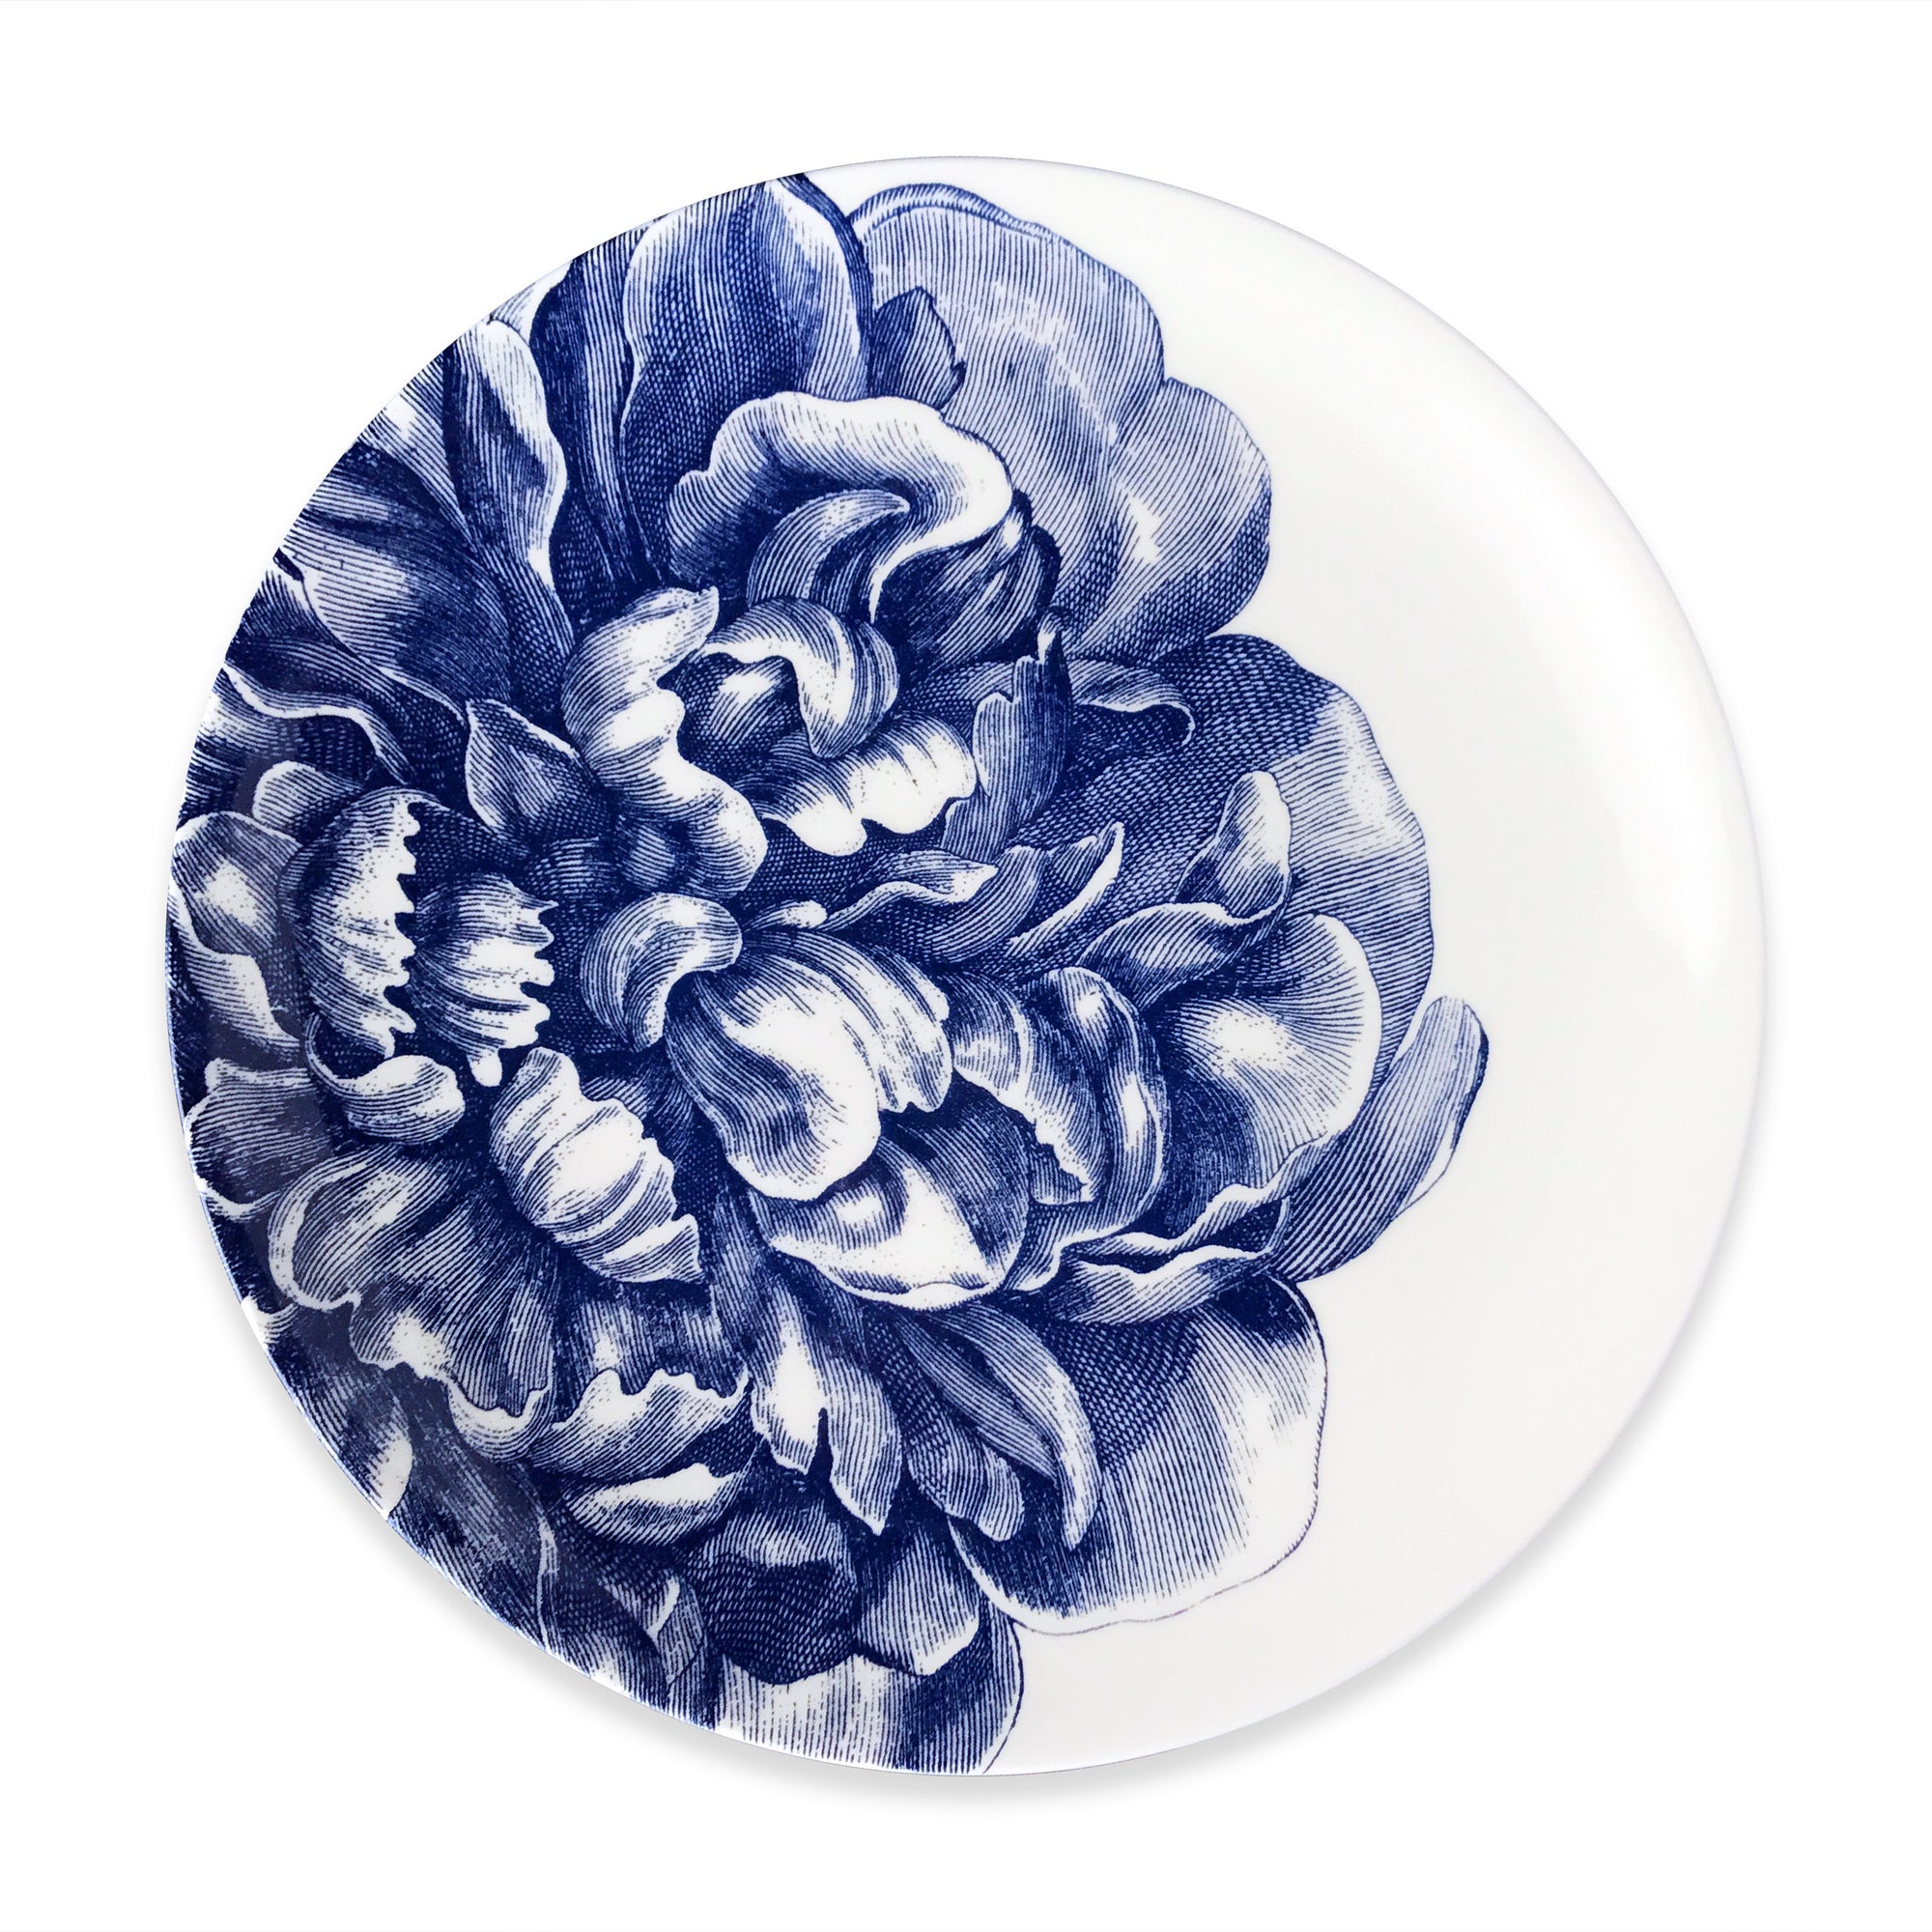 A Peony Coupe Dinner Plate from Caskata Artisanal Home with a detailed blue floral pattern on a white background.